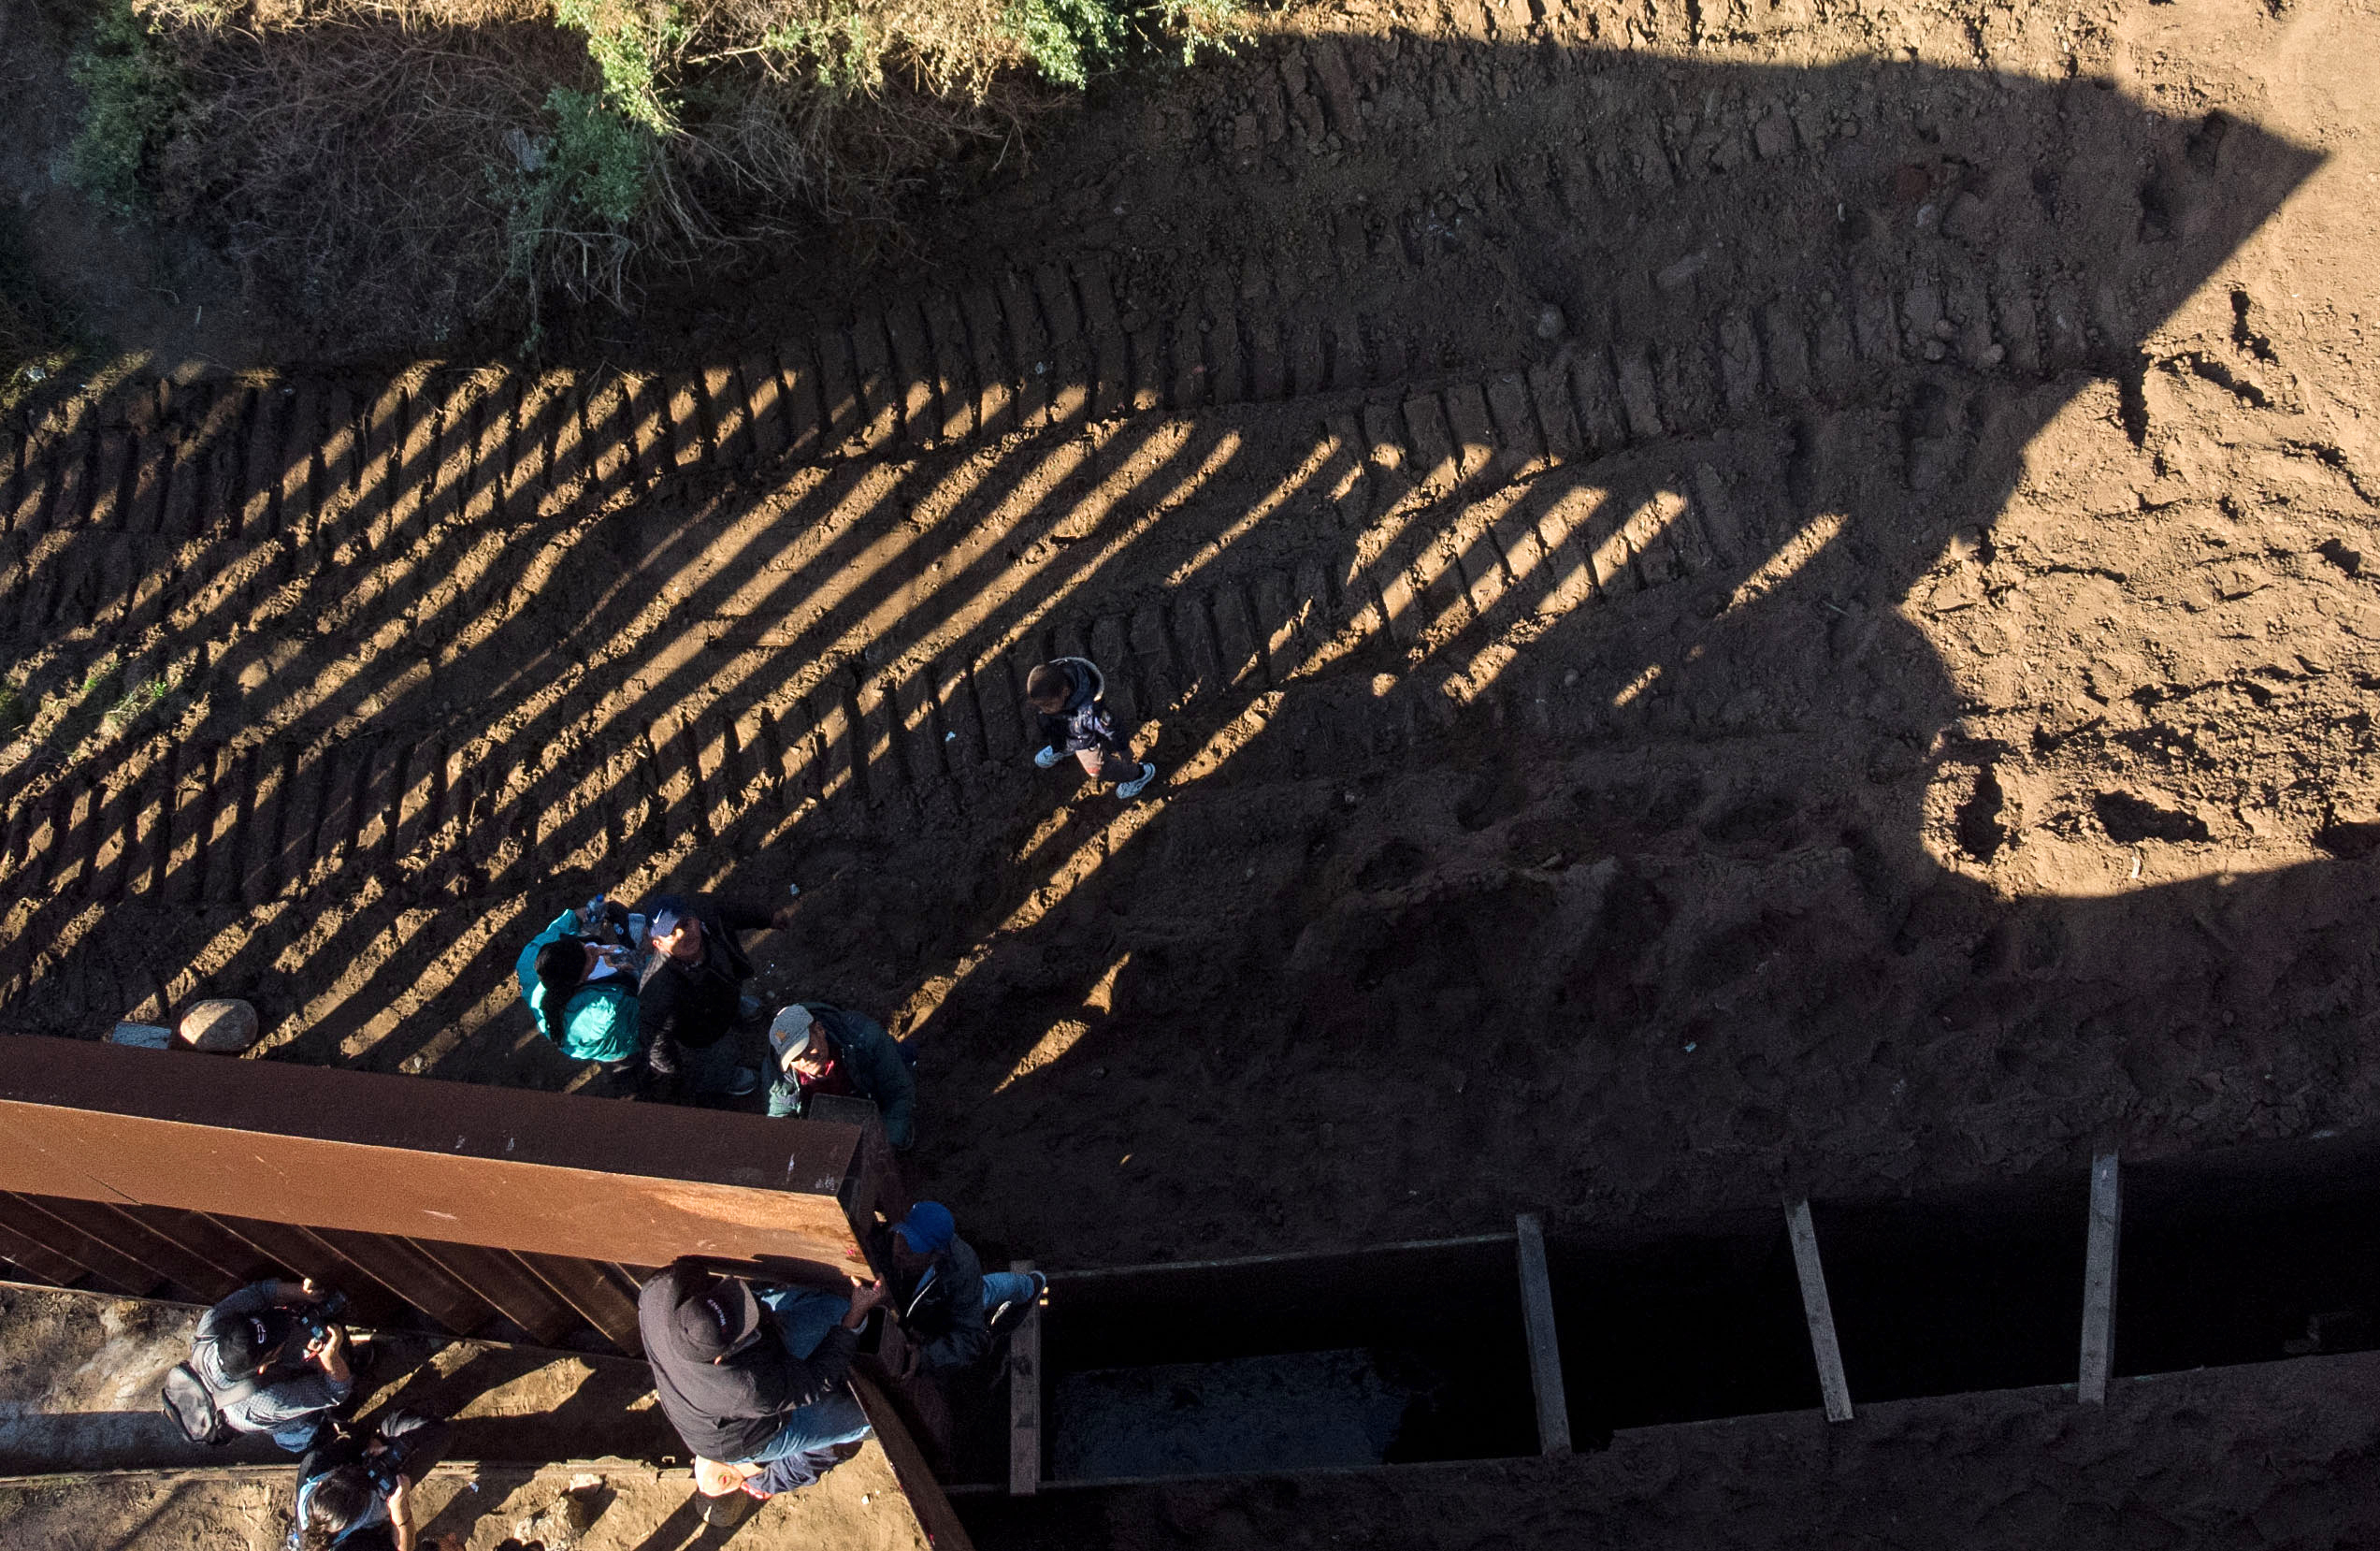 Aerial view of a group of Honduran migrants traveling in the Central American caravan, crossing the Mexico-US border fence to San Diego County, as seen from Playas de Tijuana, Baja California state, Mexico on December 12, 2018. - Thousands of Central American migrants have trekked for over a month in the hopes of reaching the United States. (Photo by GUILLERMO ARIAS/AFP/Getty Images)